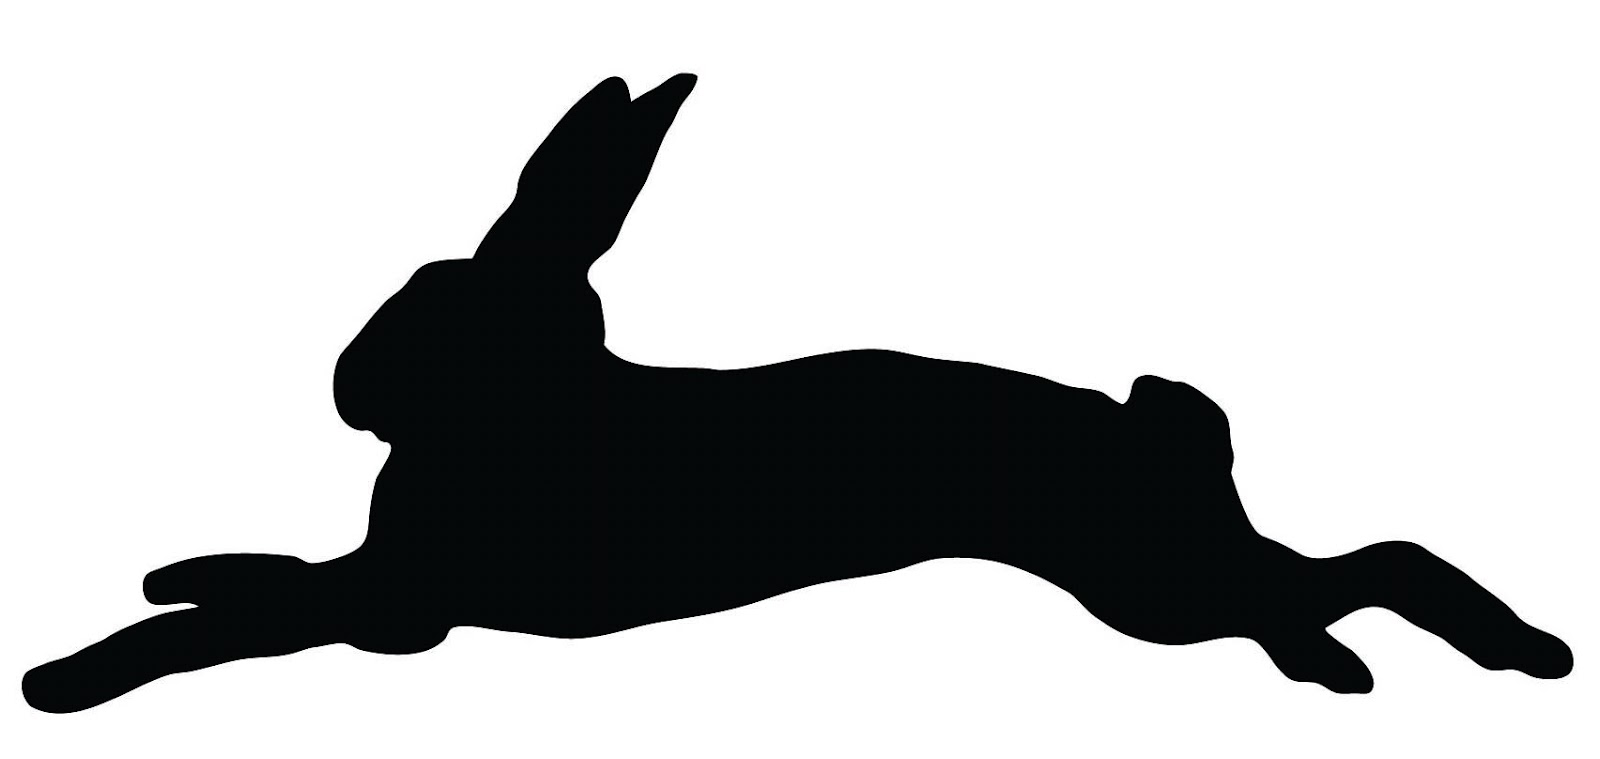 clipart image bunny silhouette - photo #13